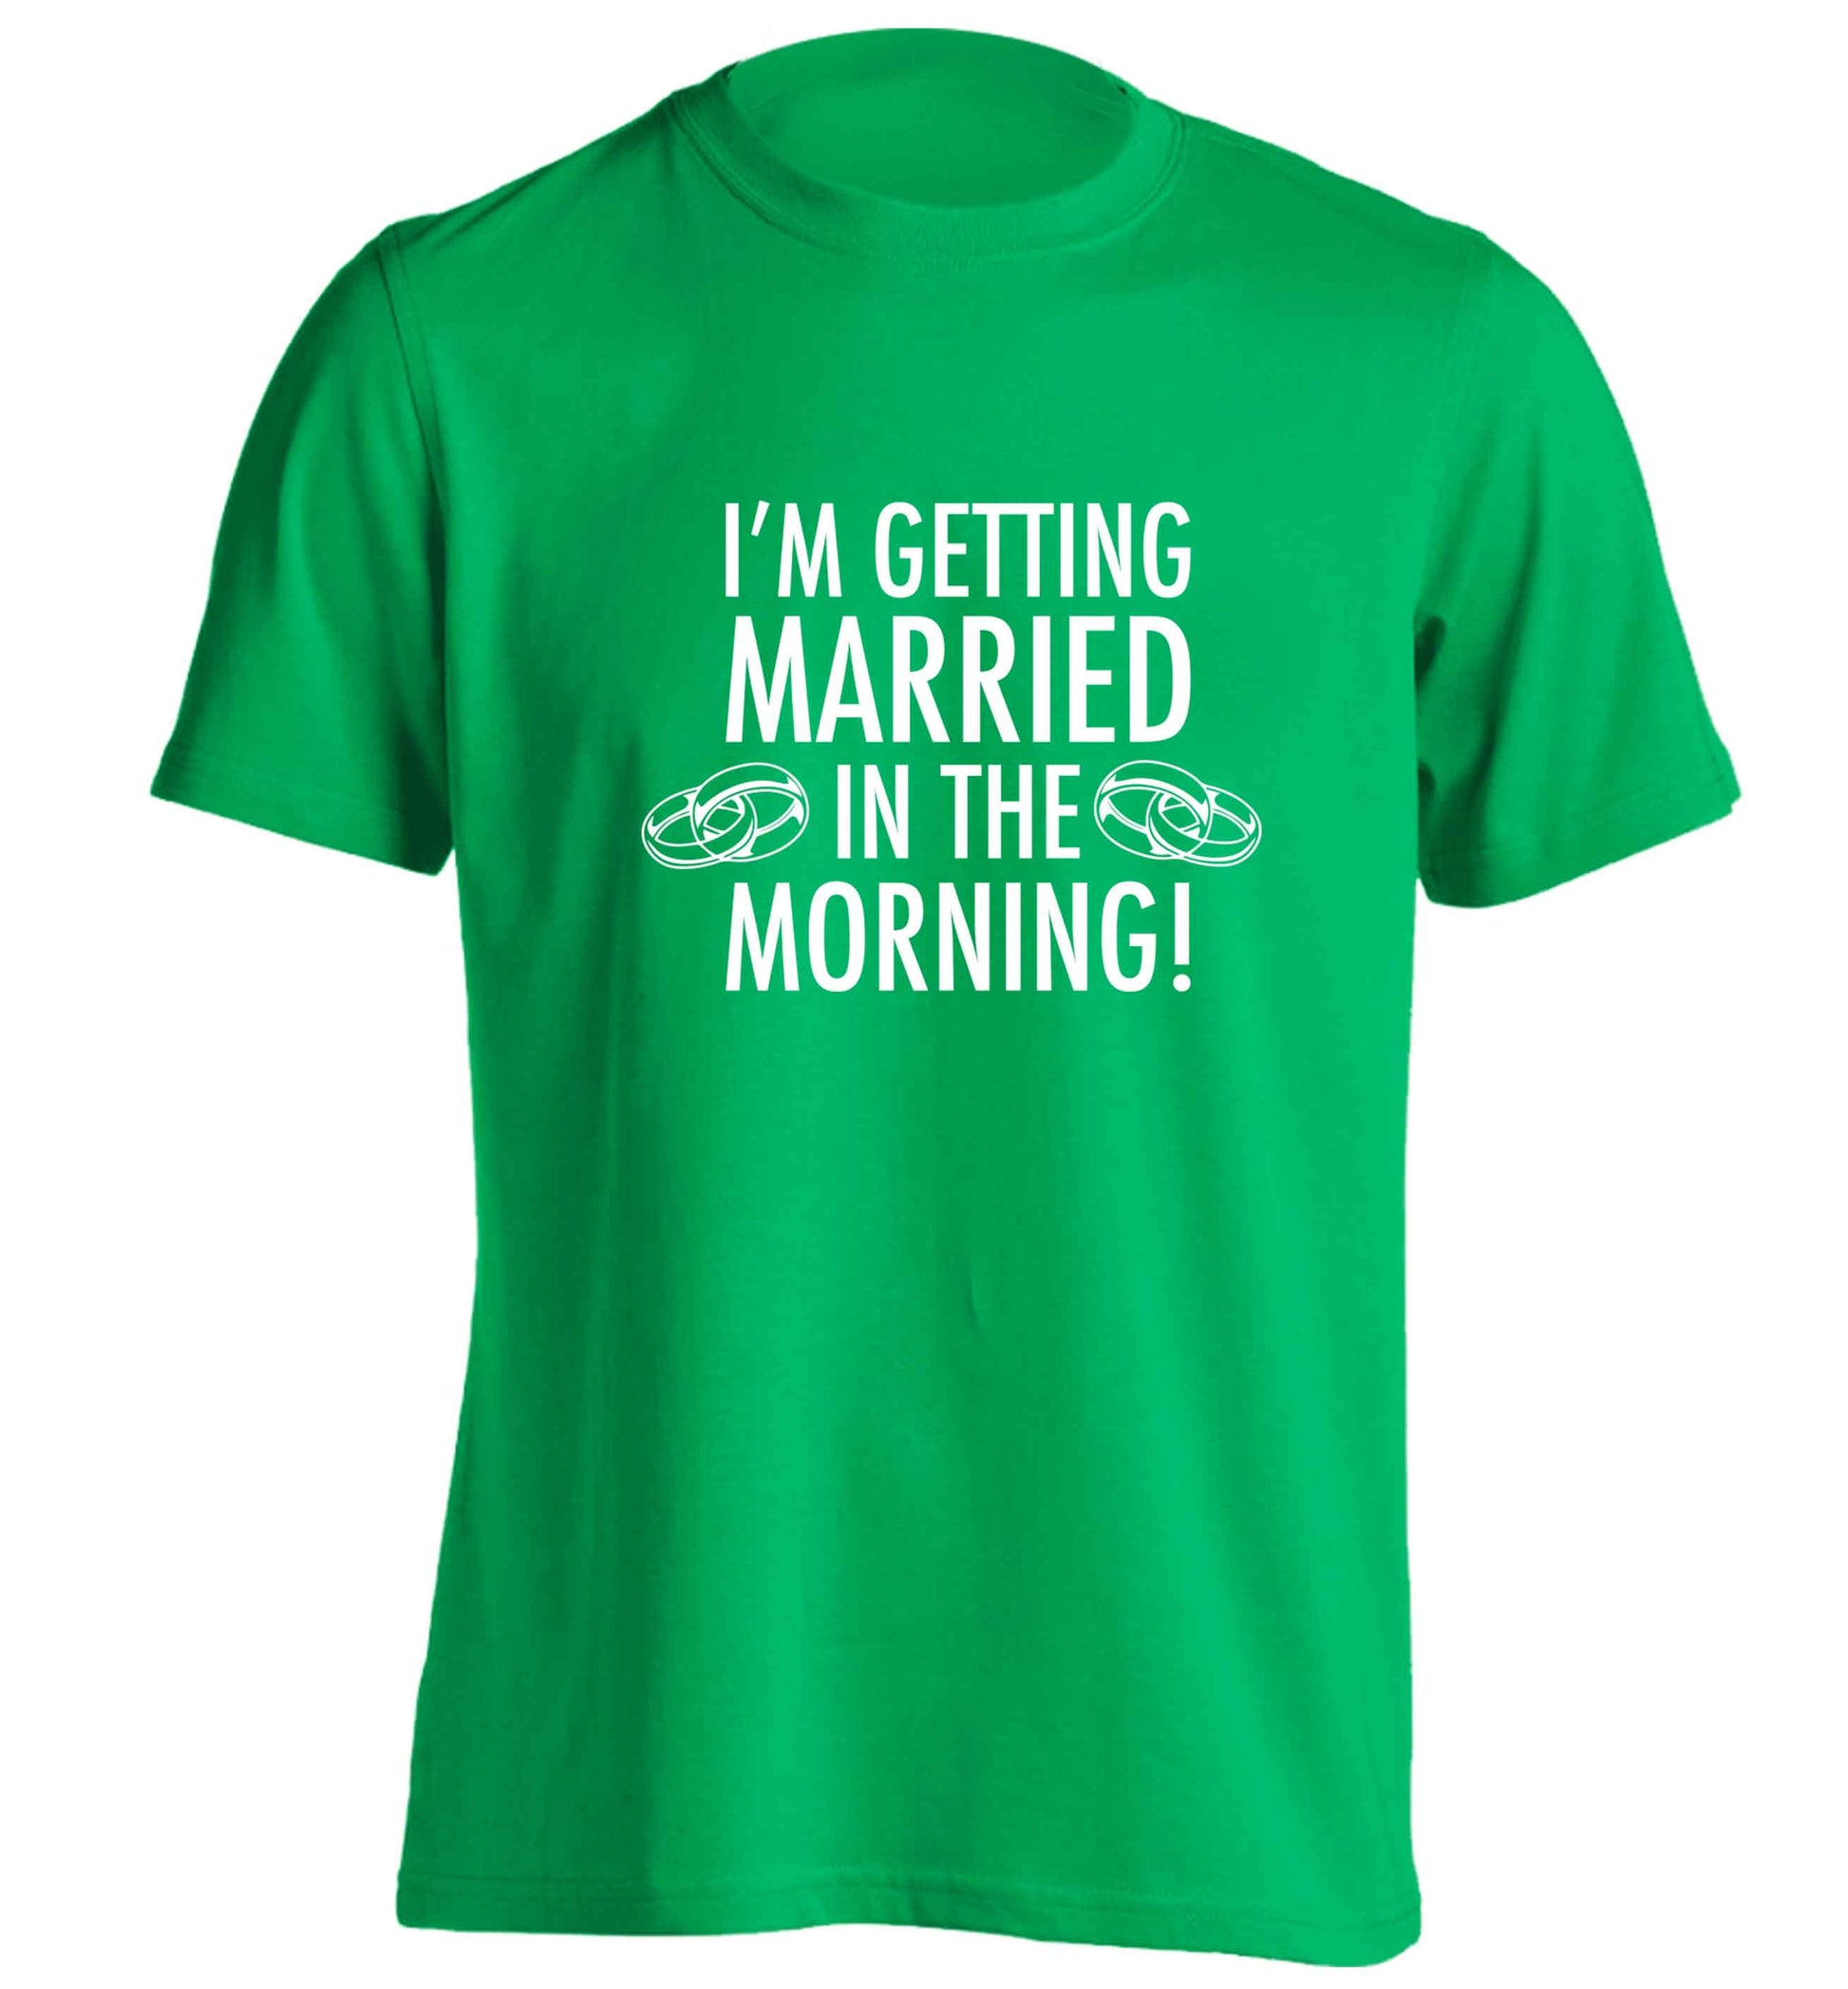 I'm getting married in the morning! adults unisex green Tshirt 2XL